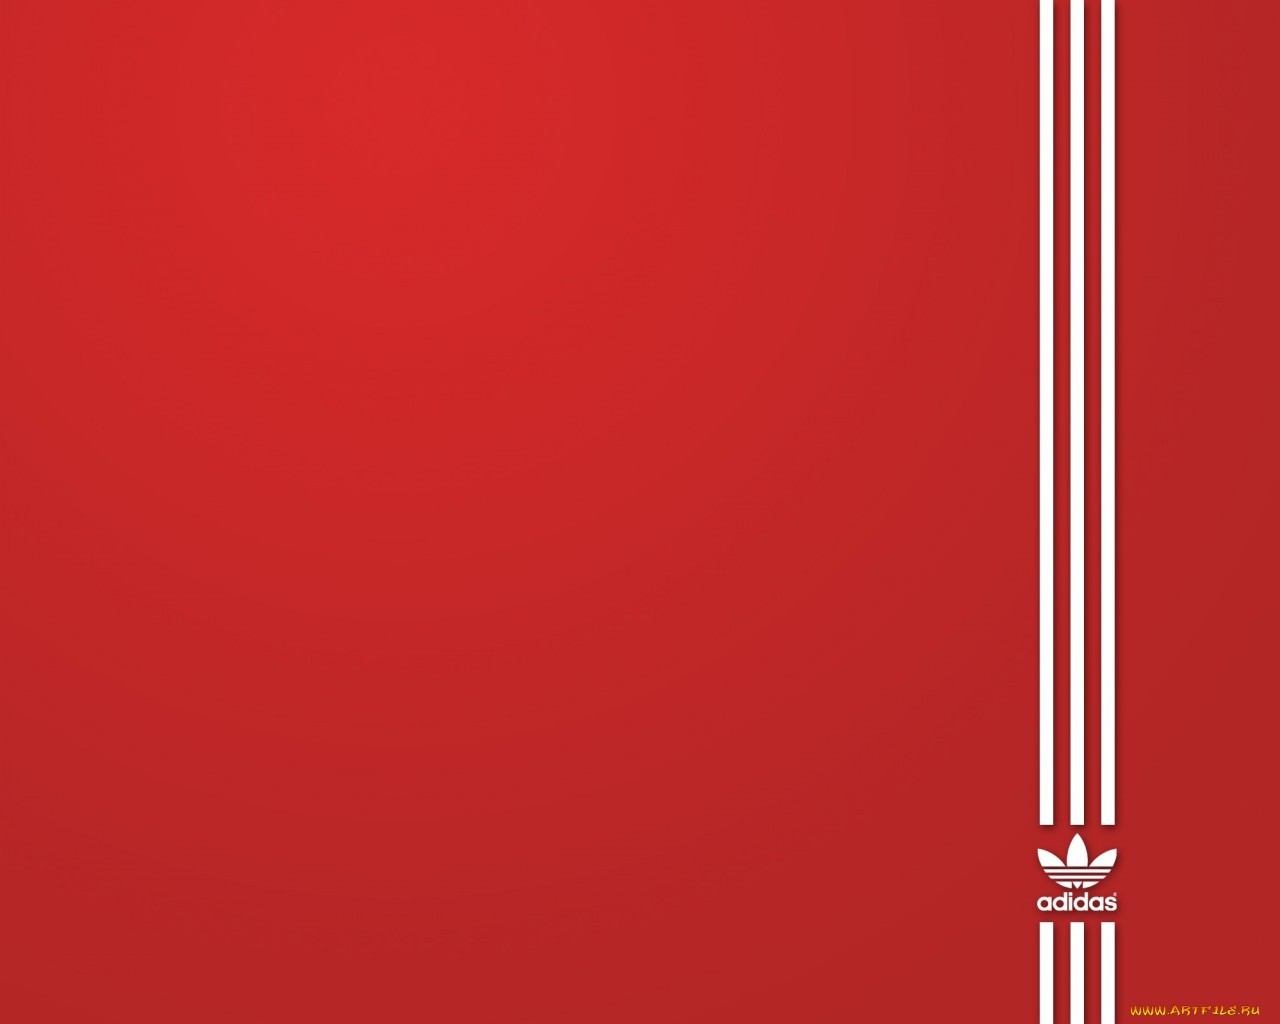 adidas, brands, logos, background, red